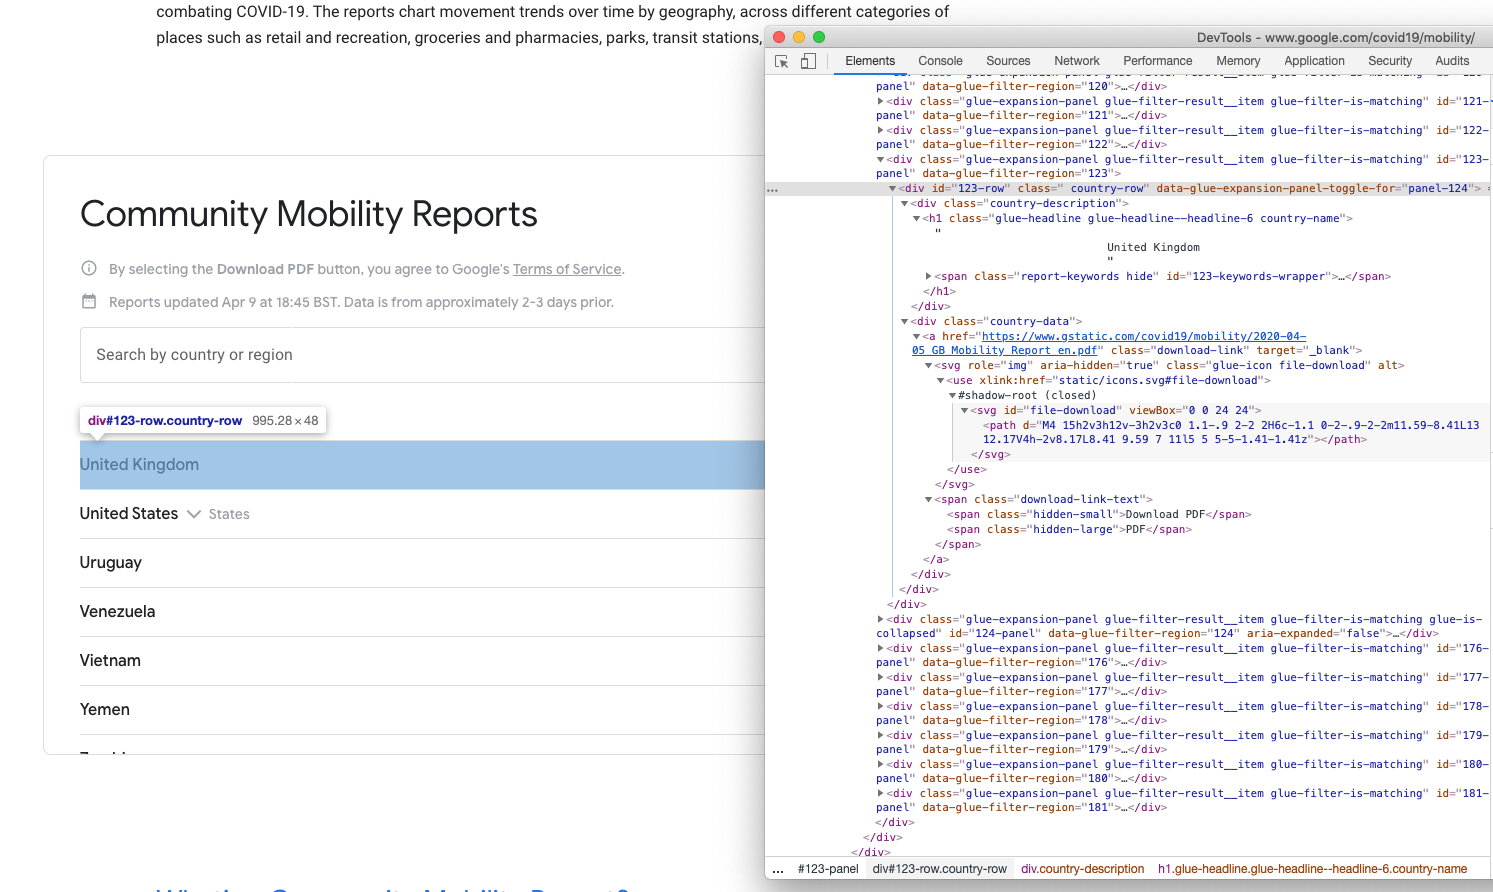 Screenshot of the Google Mobility Report